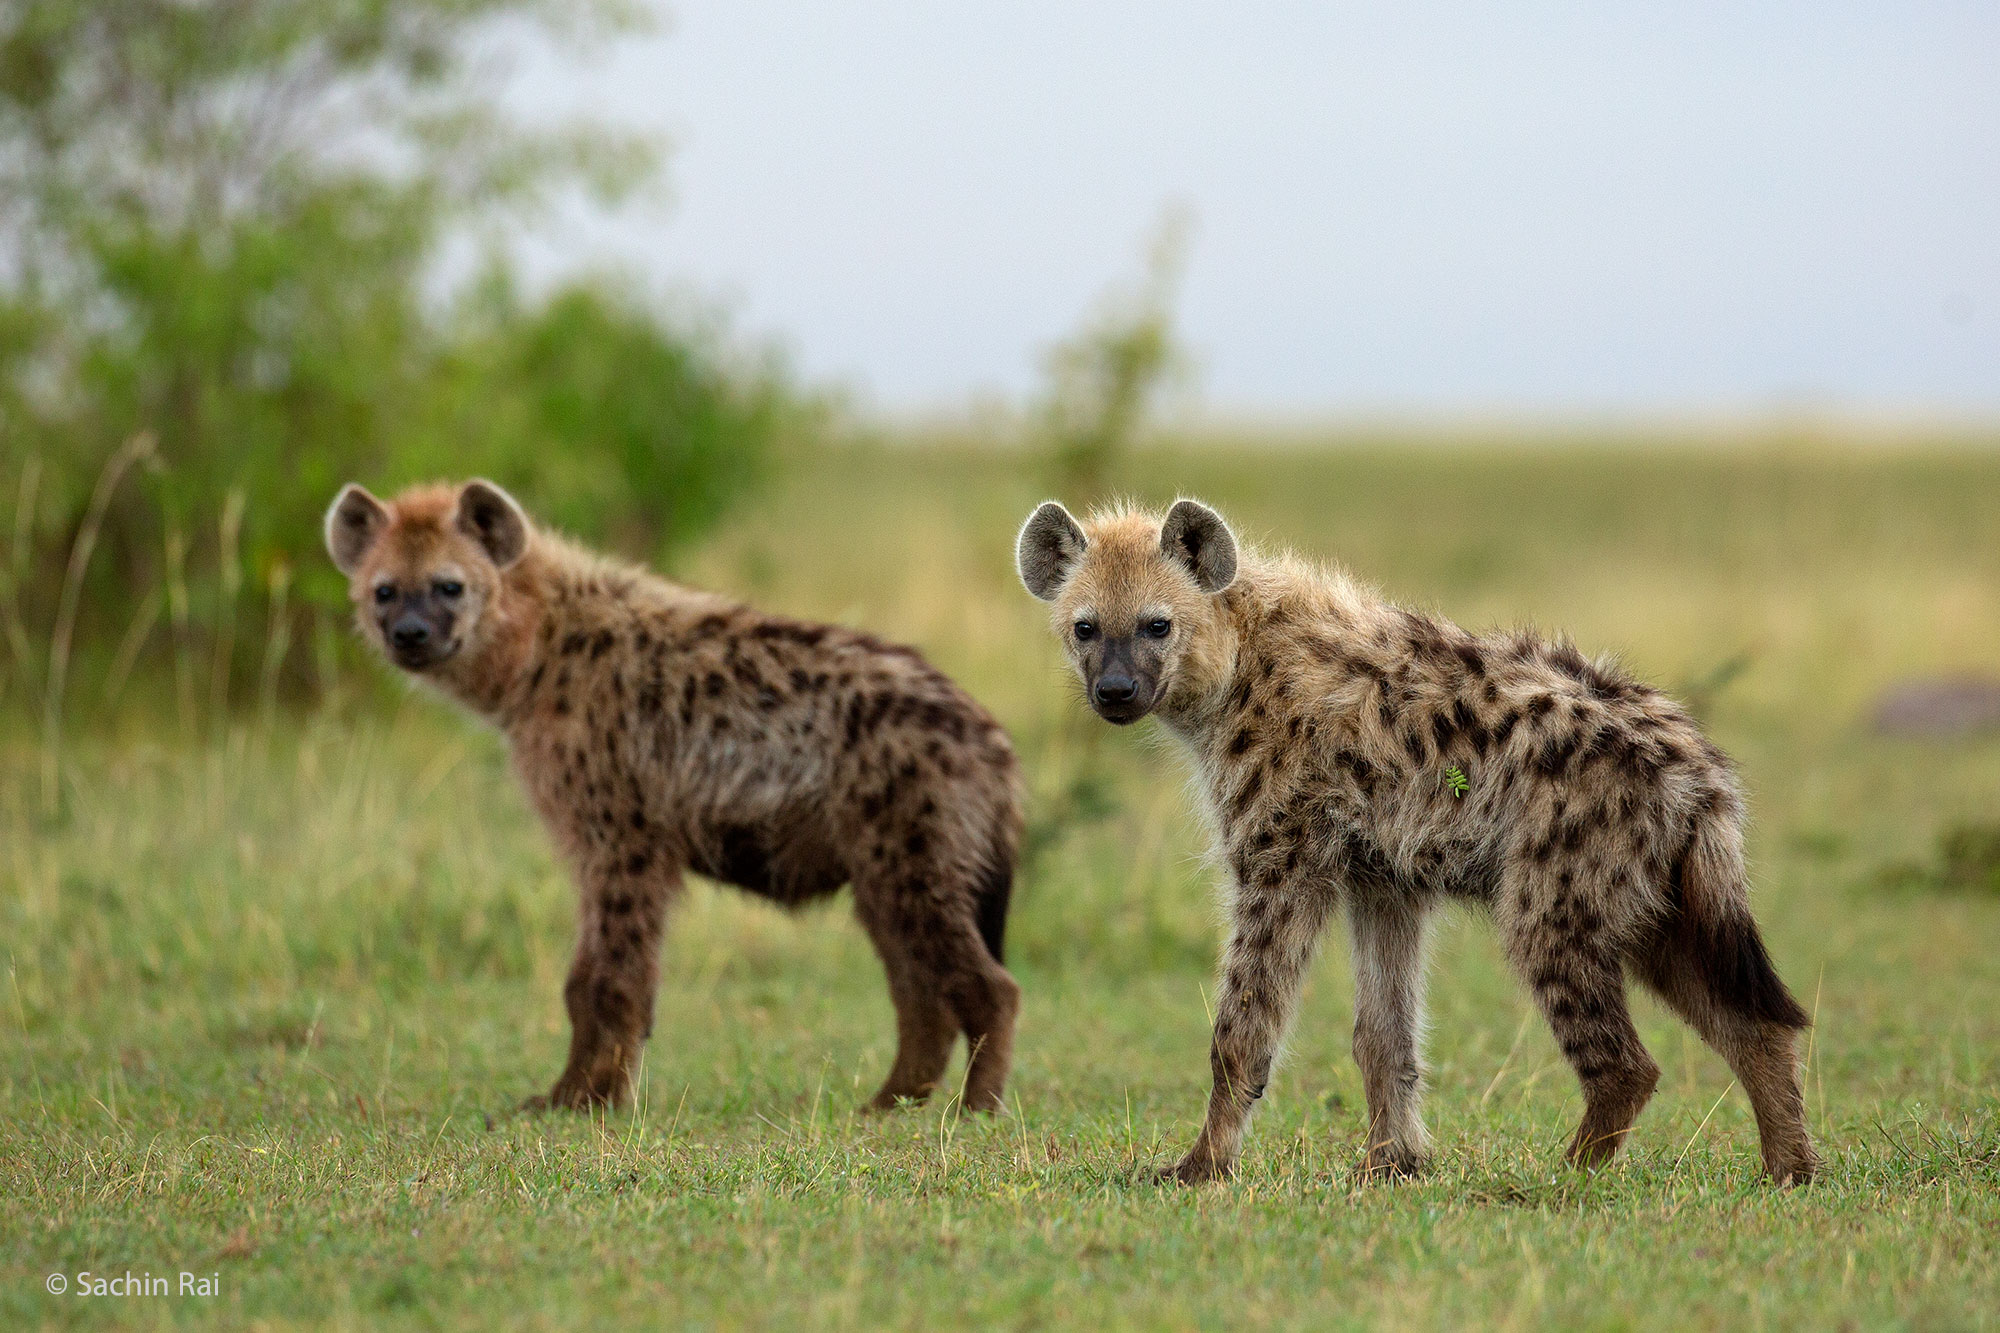 The story of the Spotted Hyena - Paukwa